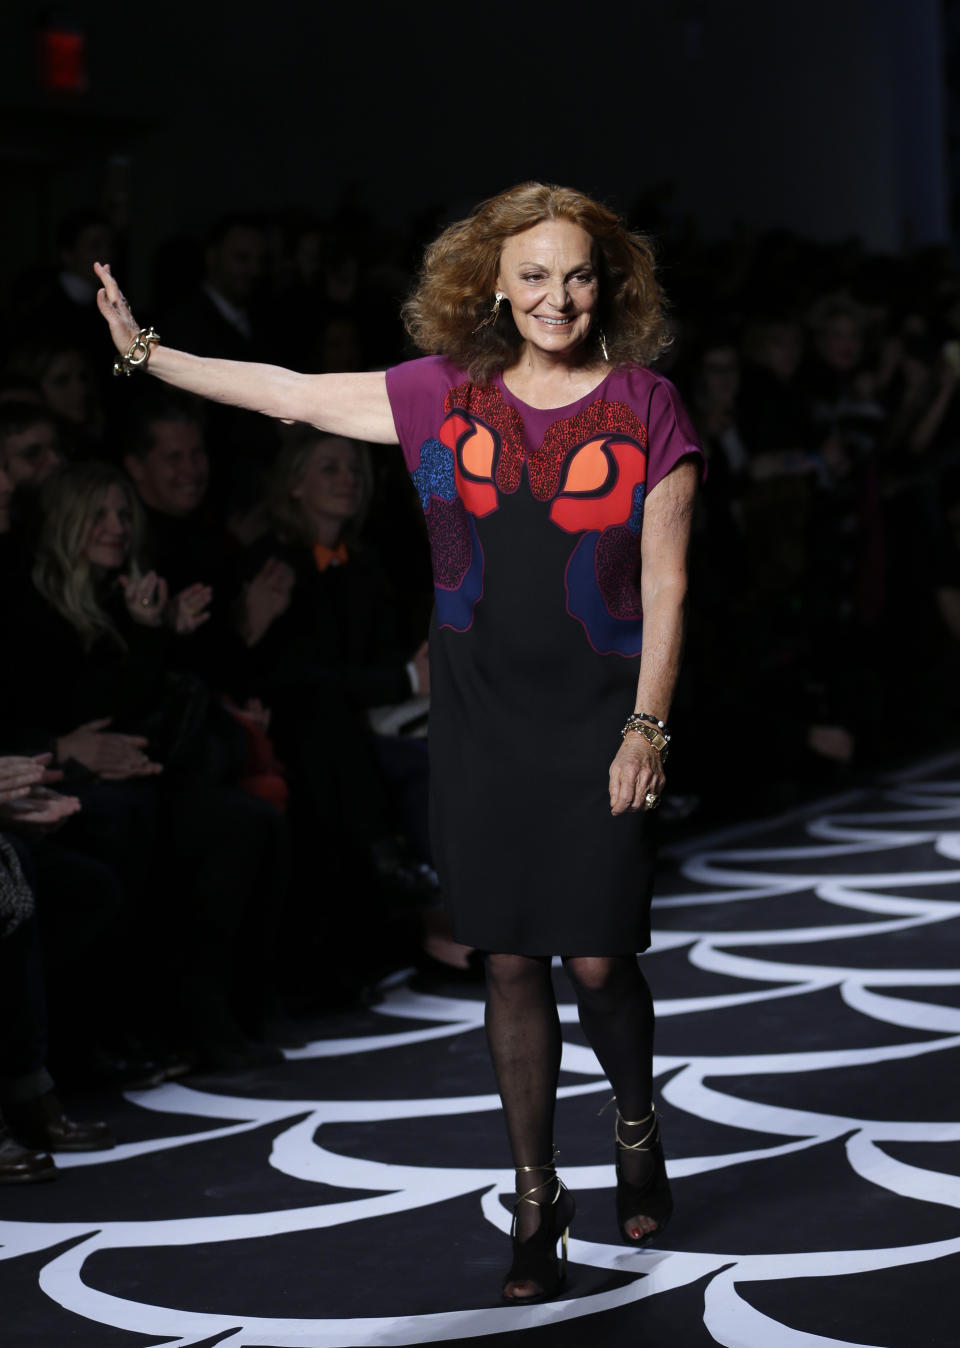 Designer Diane von Furstenberg greets the audience after her Fall 2014 collection is modeled during Fashion Week in New York, Sunday, Feb. 9, 2014. (AP Photo/Seth Wenig)